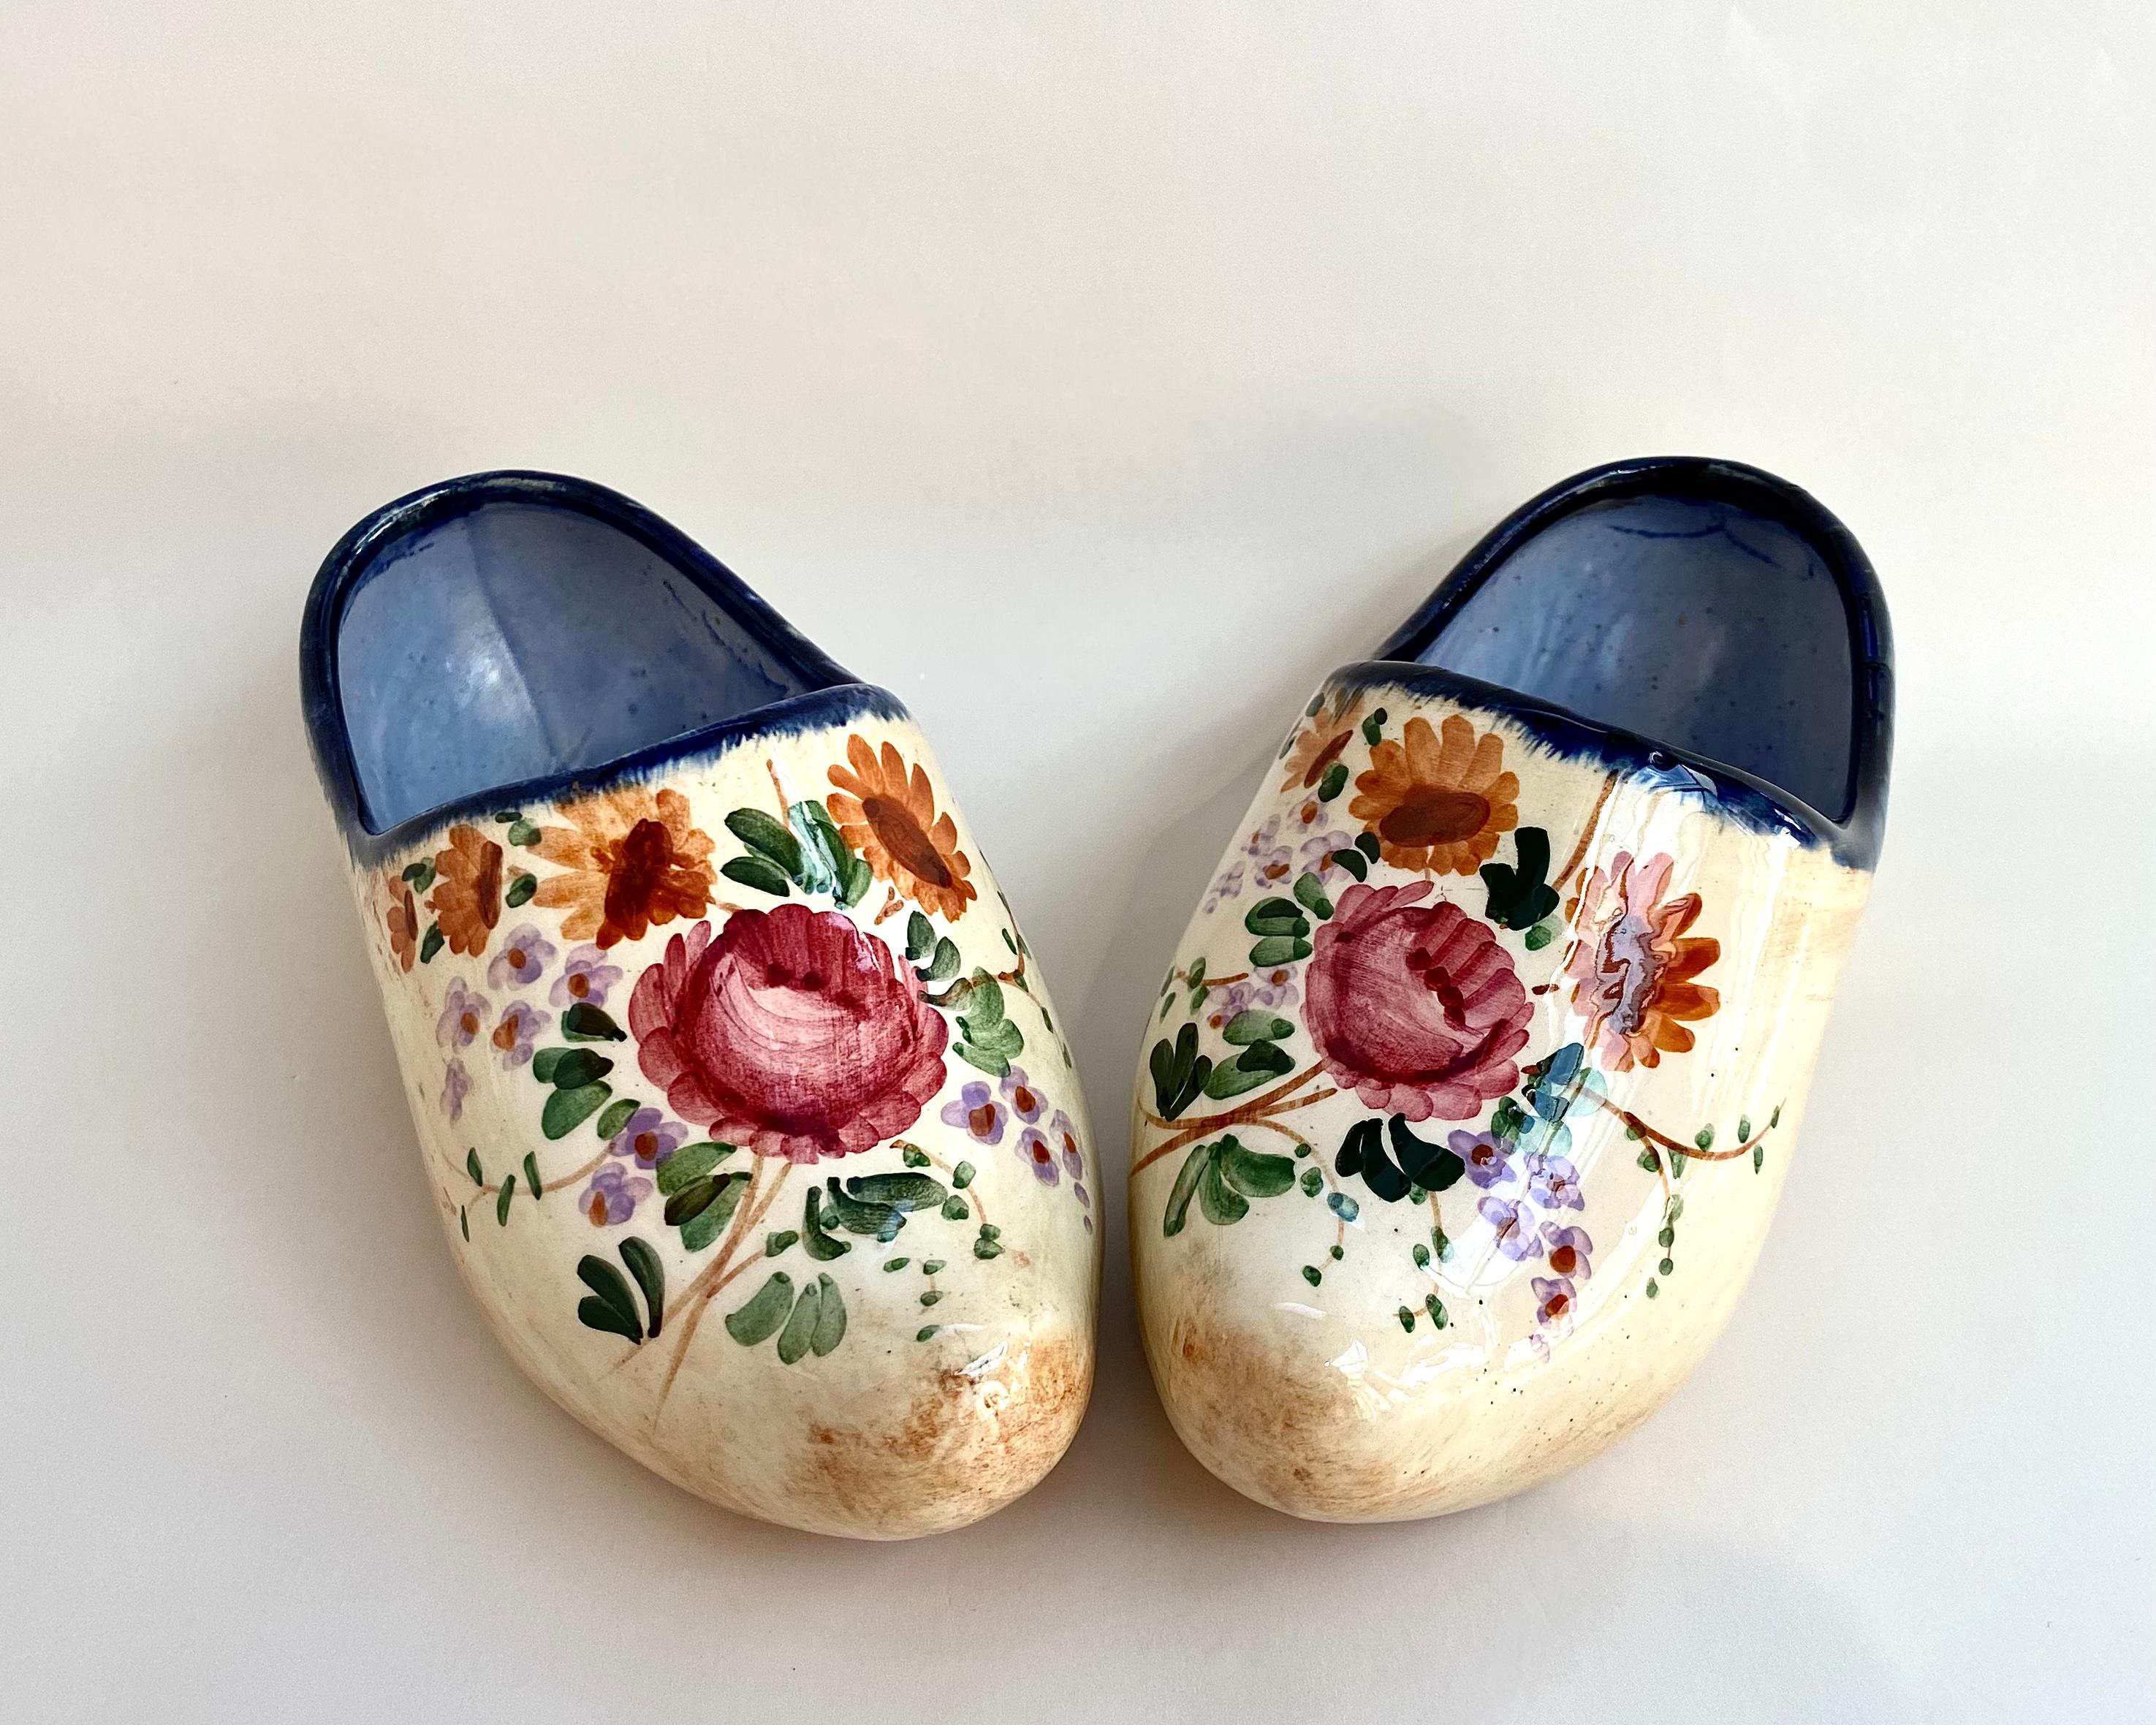 A charming vintage pair of shoes created in the form of traditional clogs.

Belgium, 1960s.

The miniature decorative shoes have been manufactured from glazed Belgian porcelain and feature hand painted flower and leaf patterns.

Will also be a